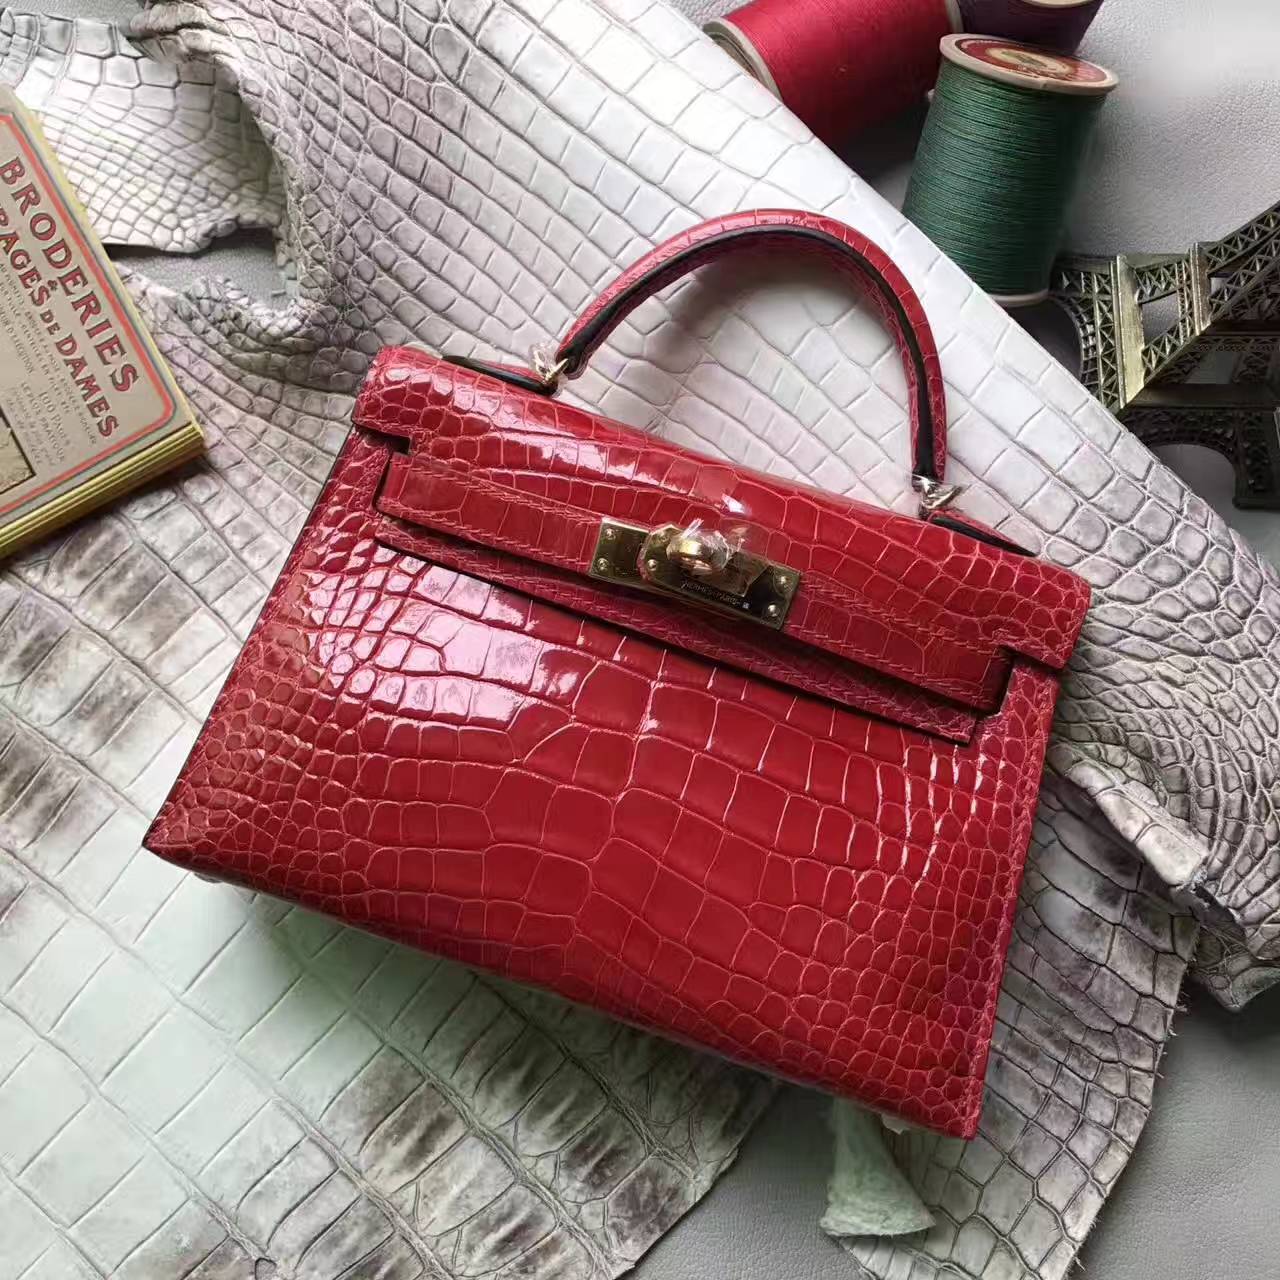 New Hermes A5 Bougainvillier Crocodile Shiny Leather Minikelly-2 Bag